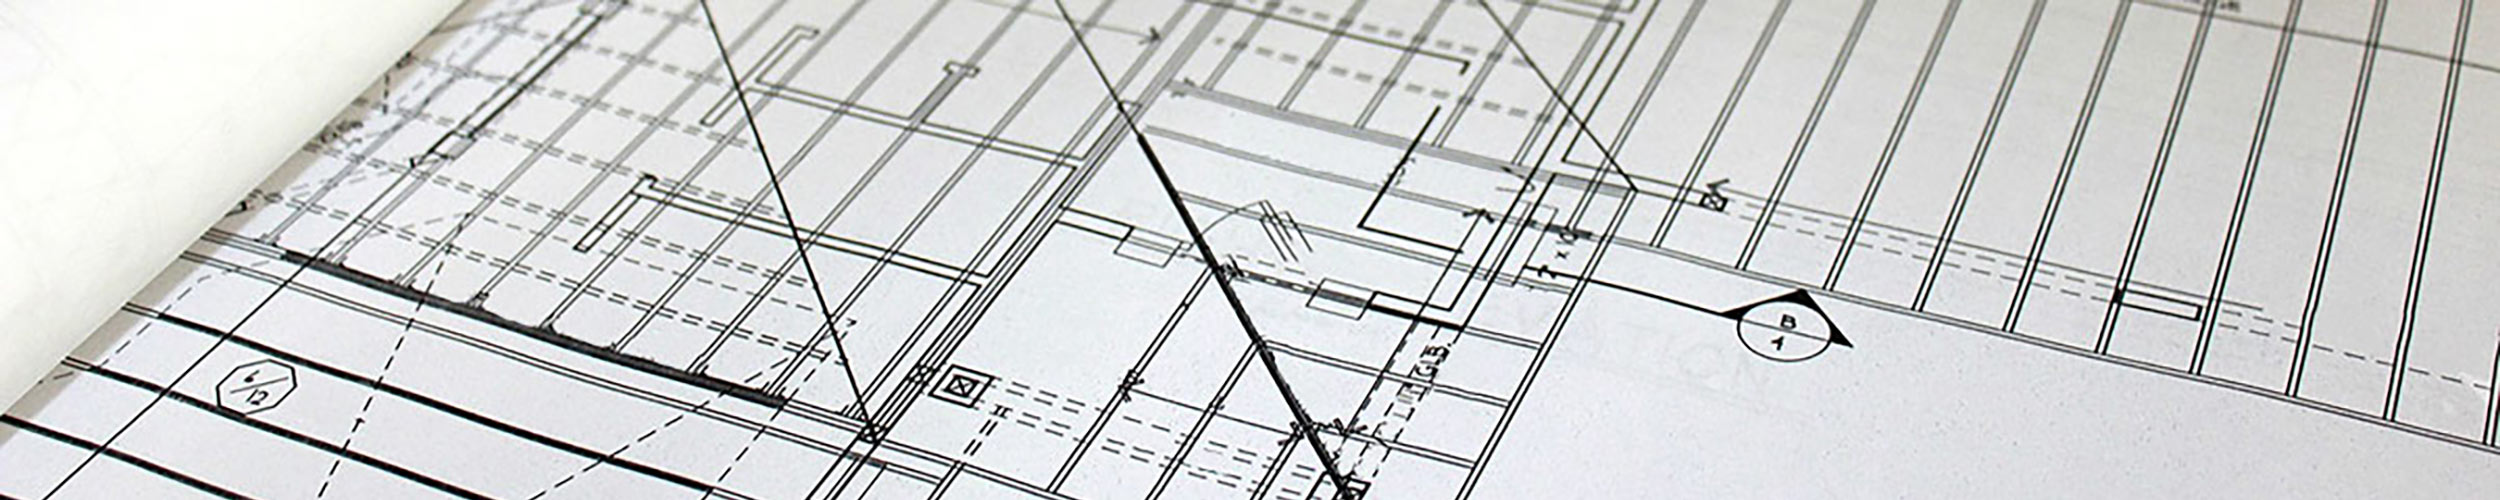 Construction drawings - Title image